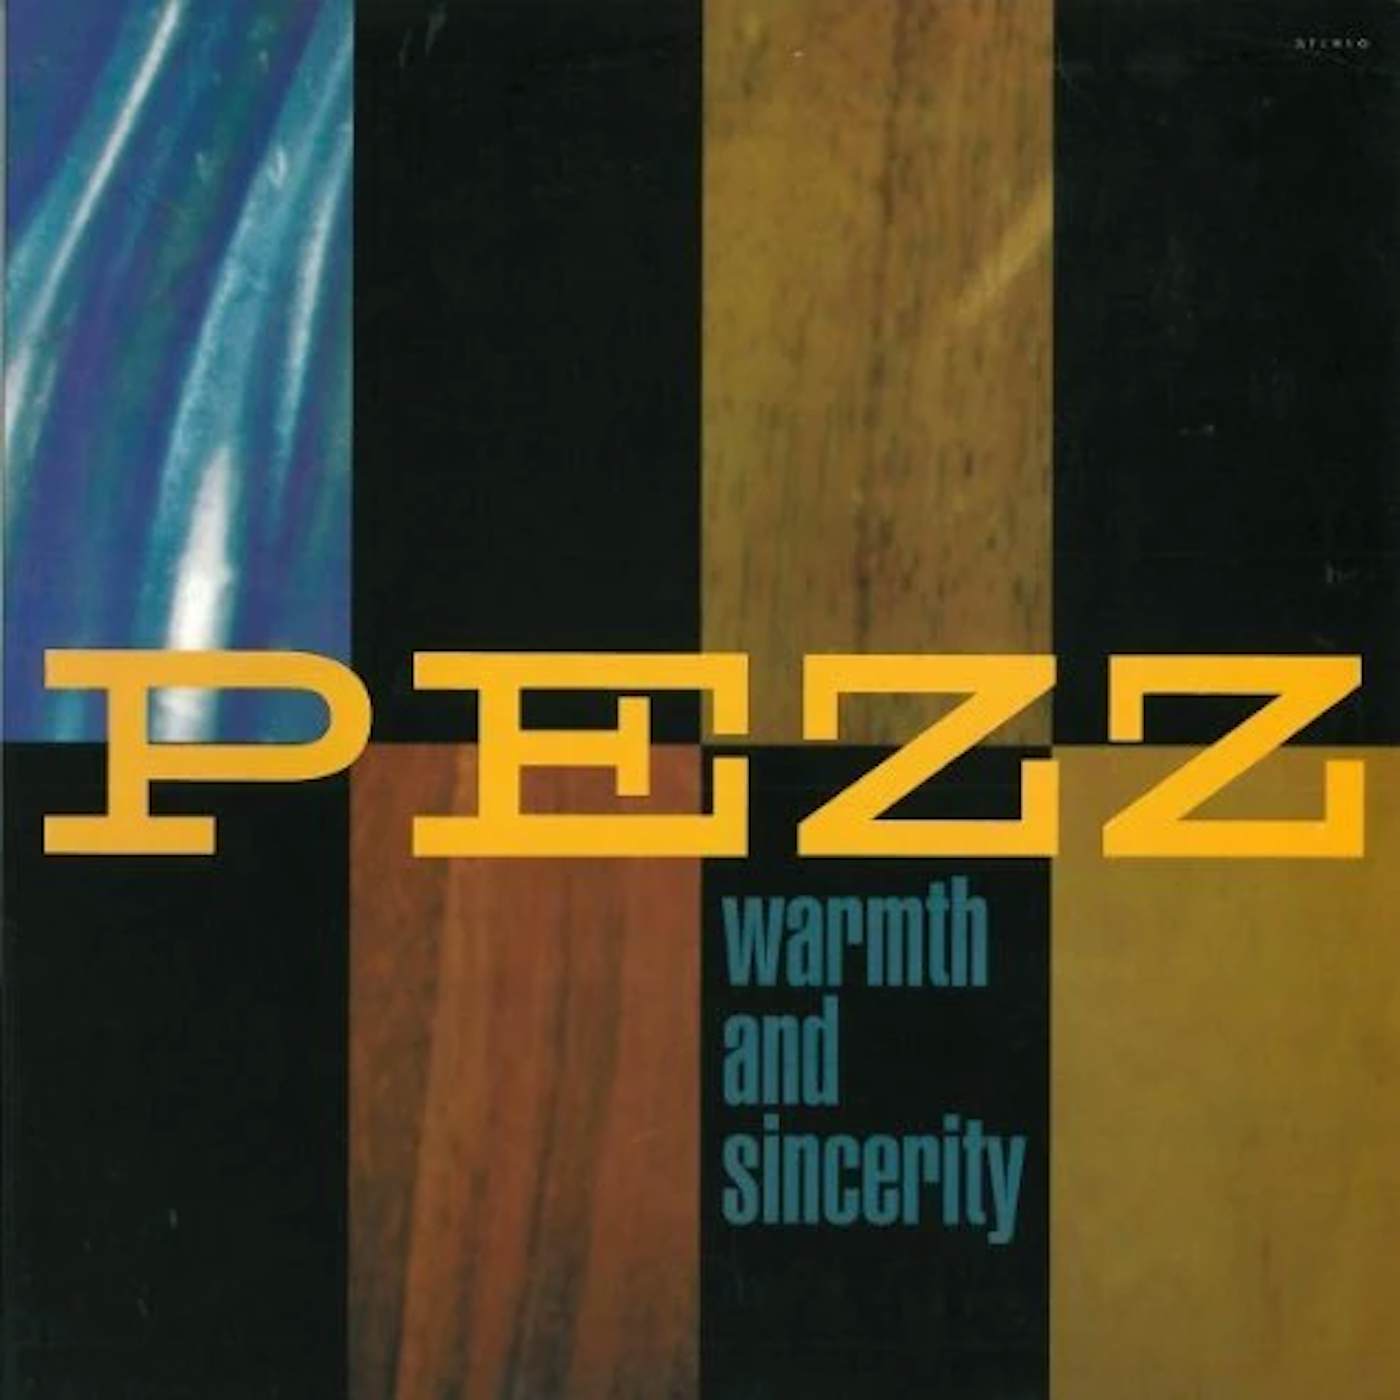 Pezz Warmth and Sincerity Vinyl Record